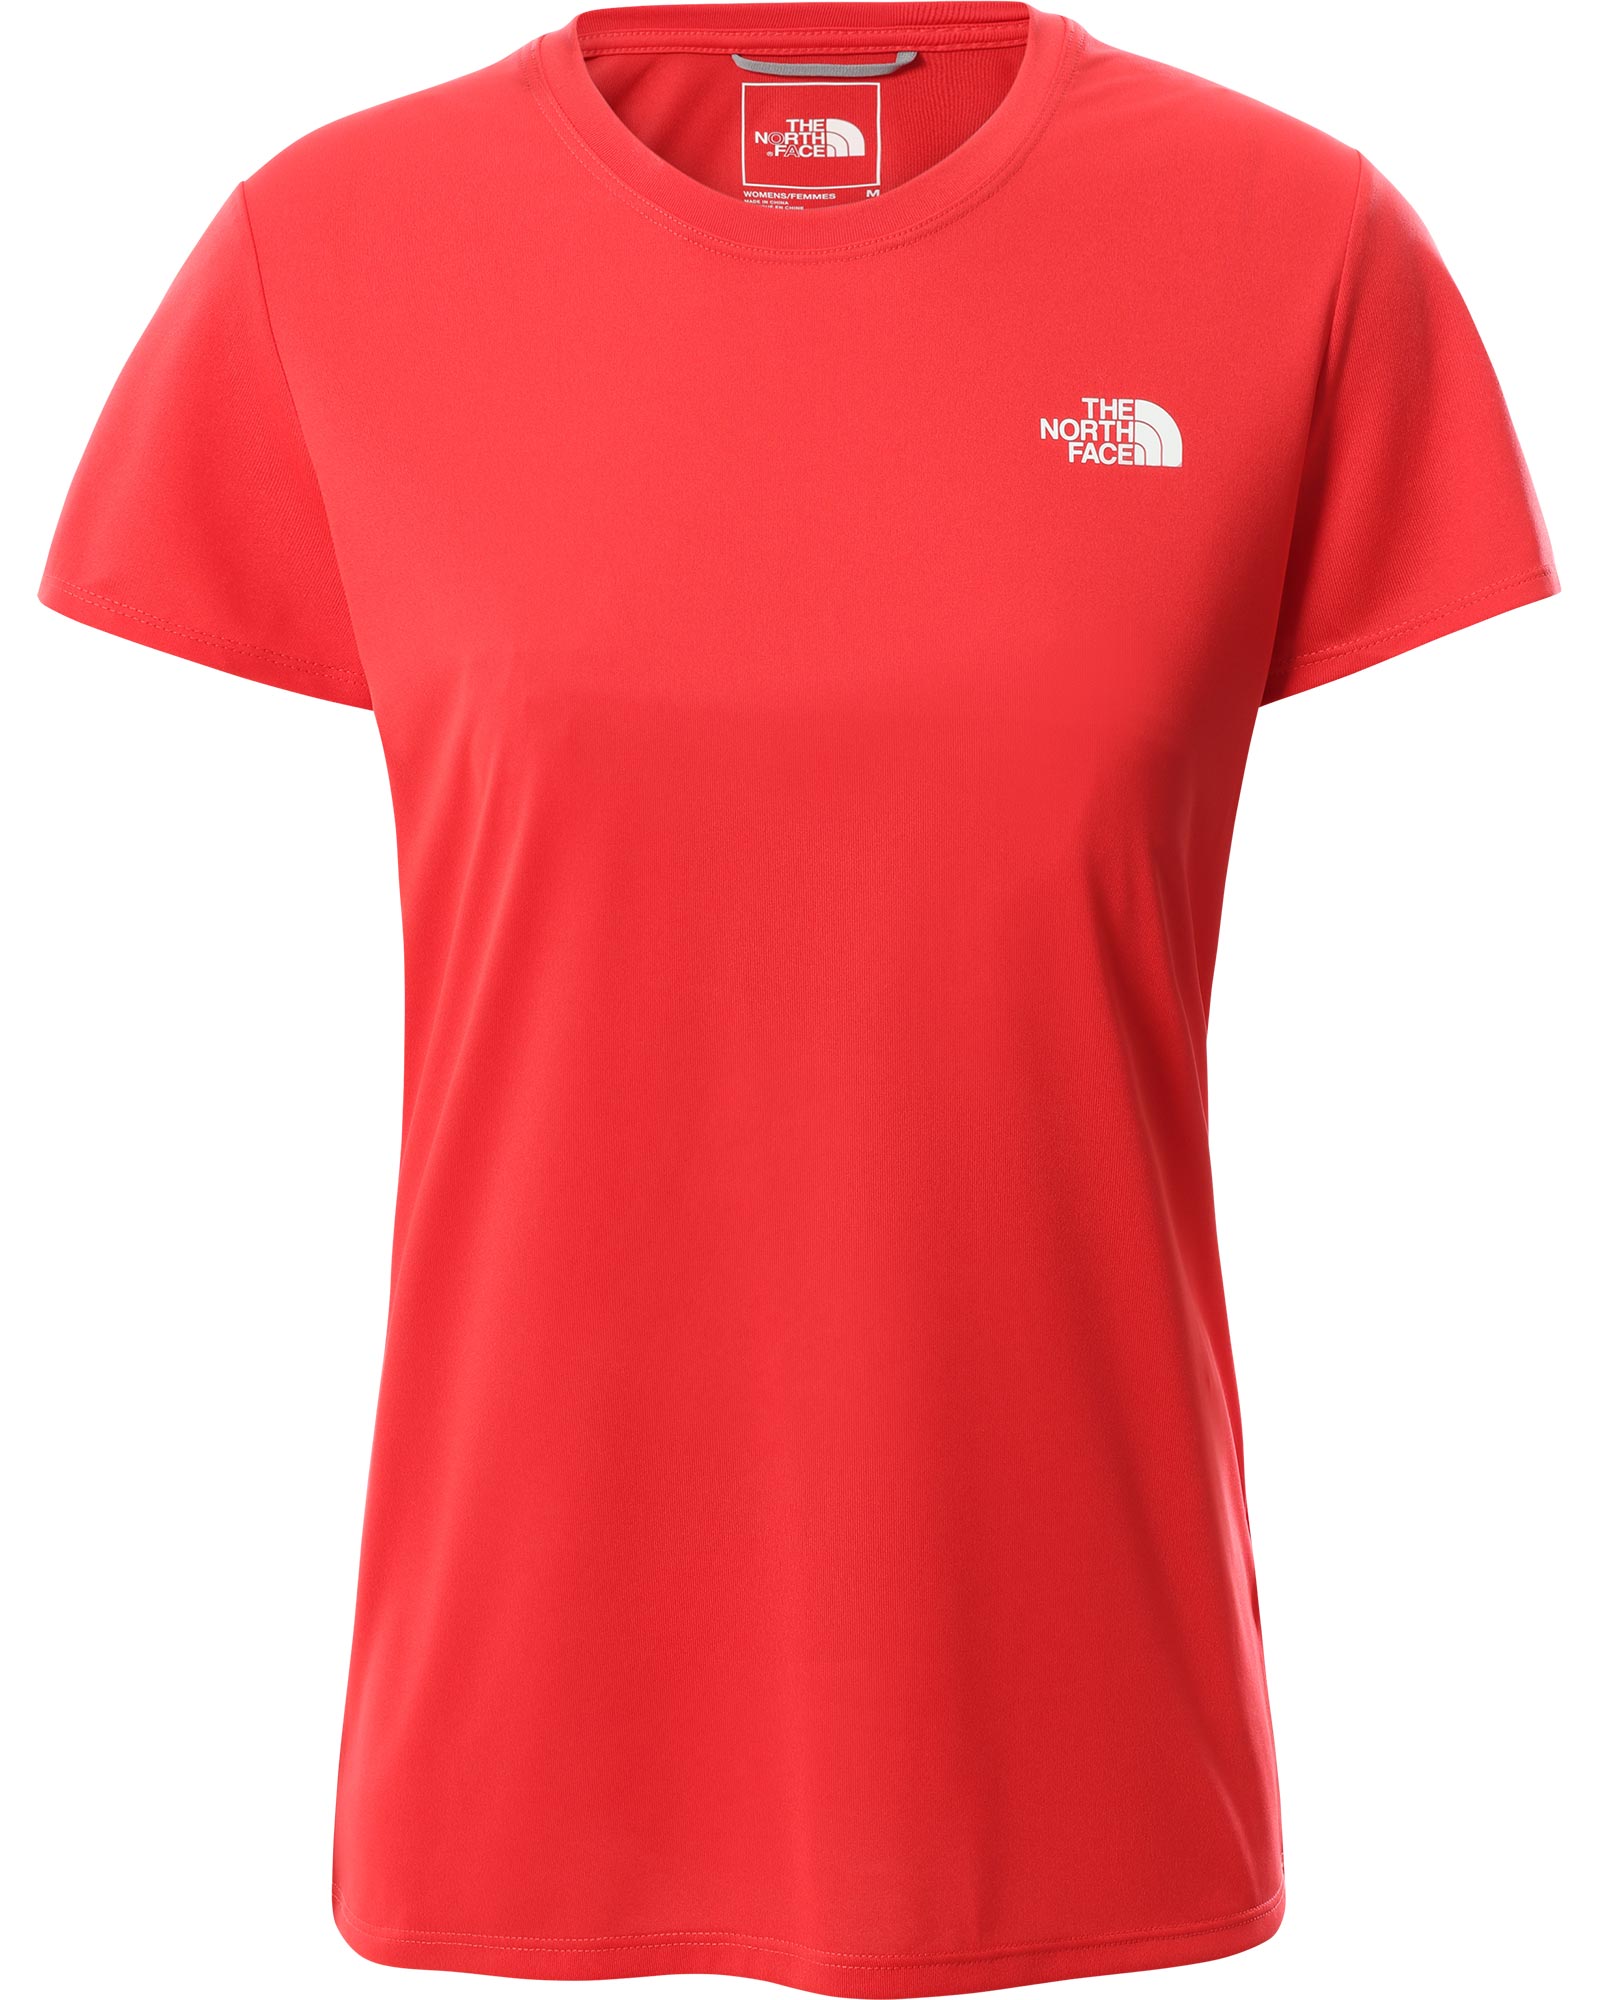 The North Face Reaxion Amp Women’s Crew T Shirt - Horizon Red M